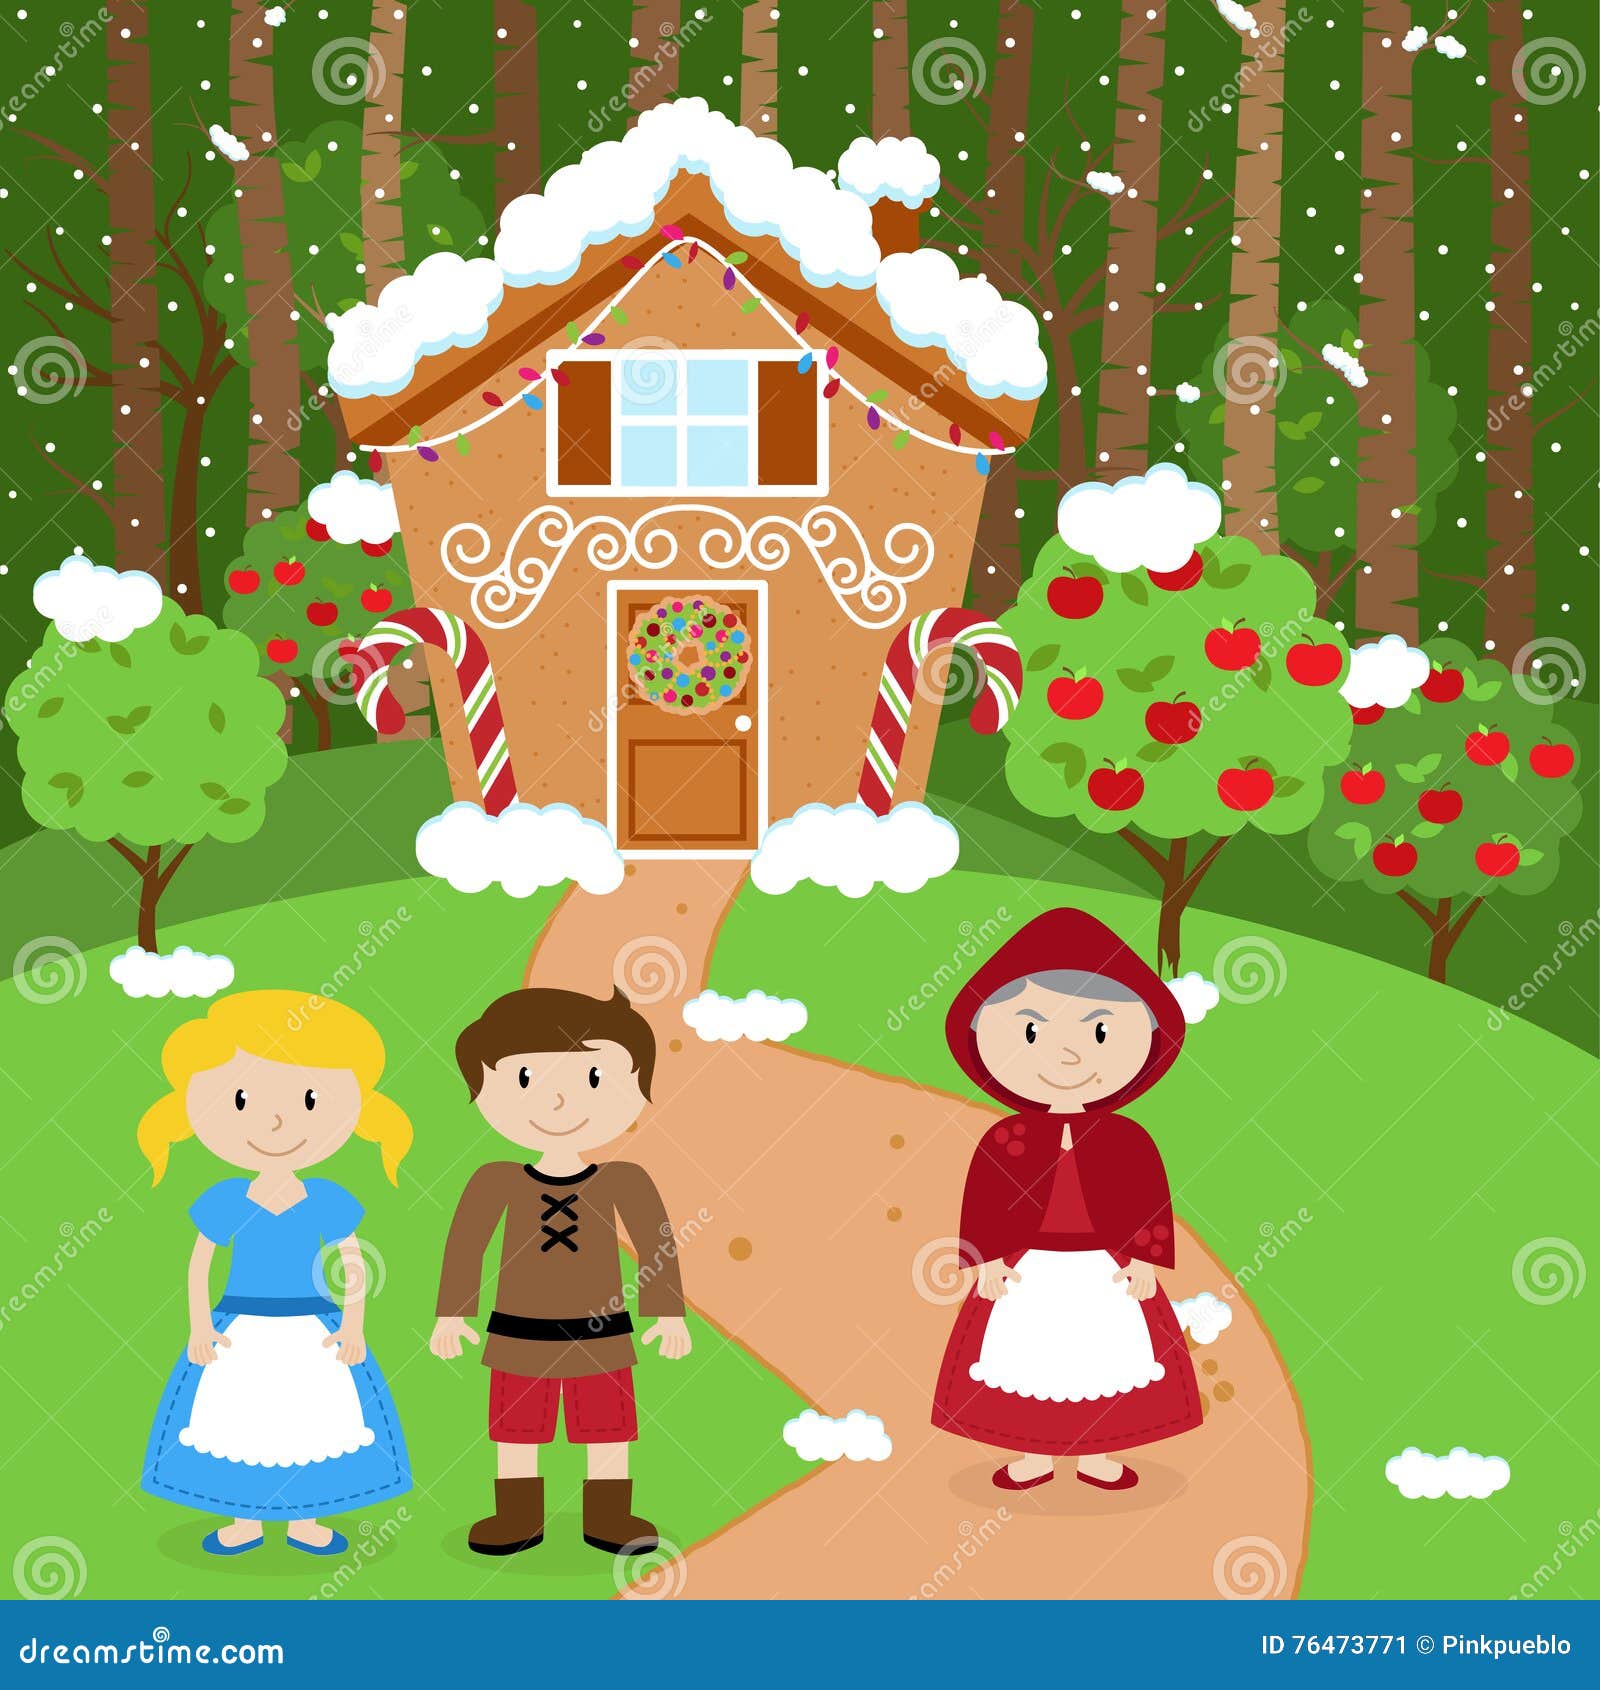 fairy tale  scene with hansel and gretel, the witch